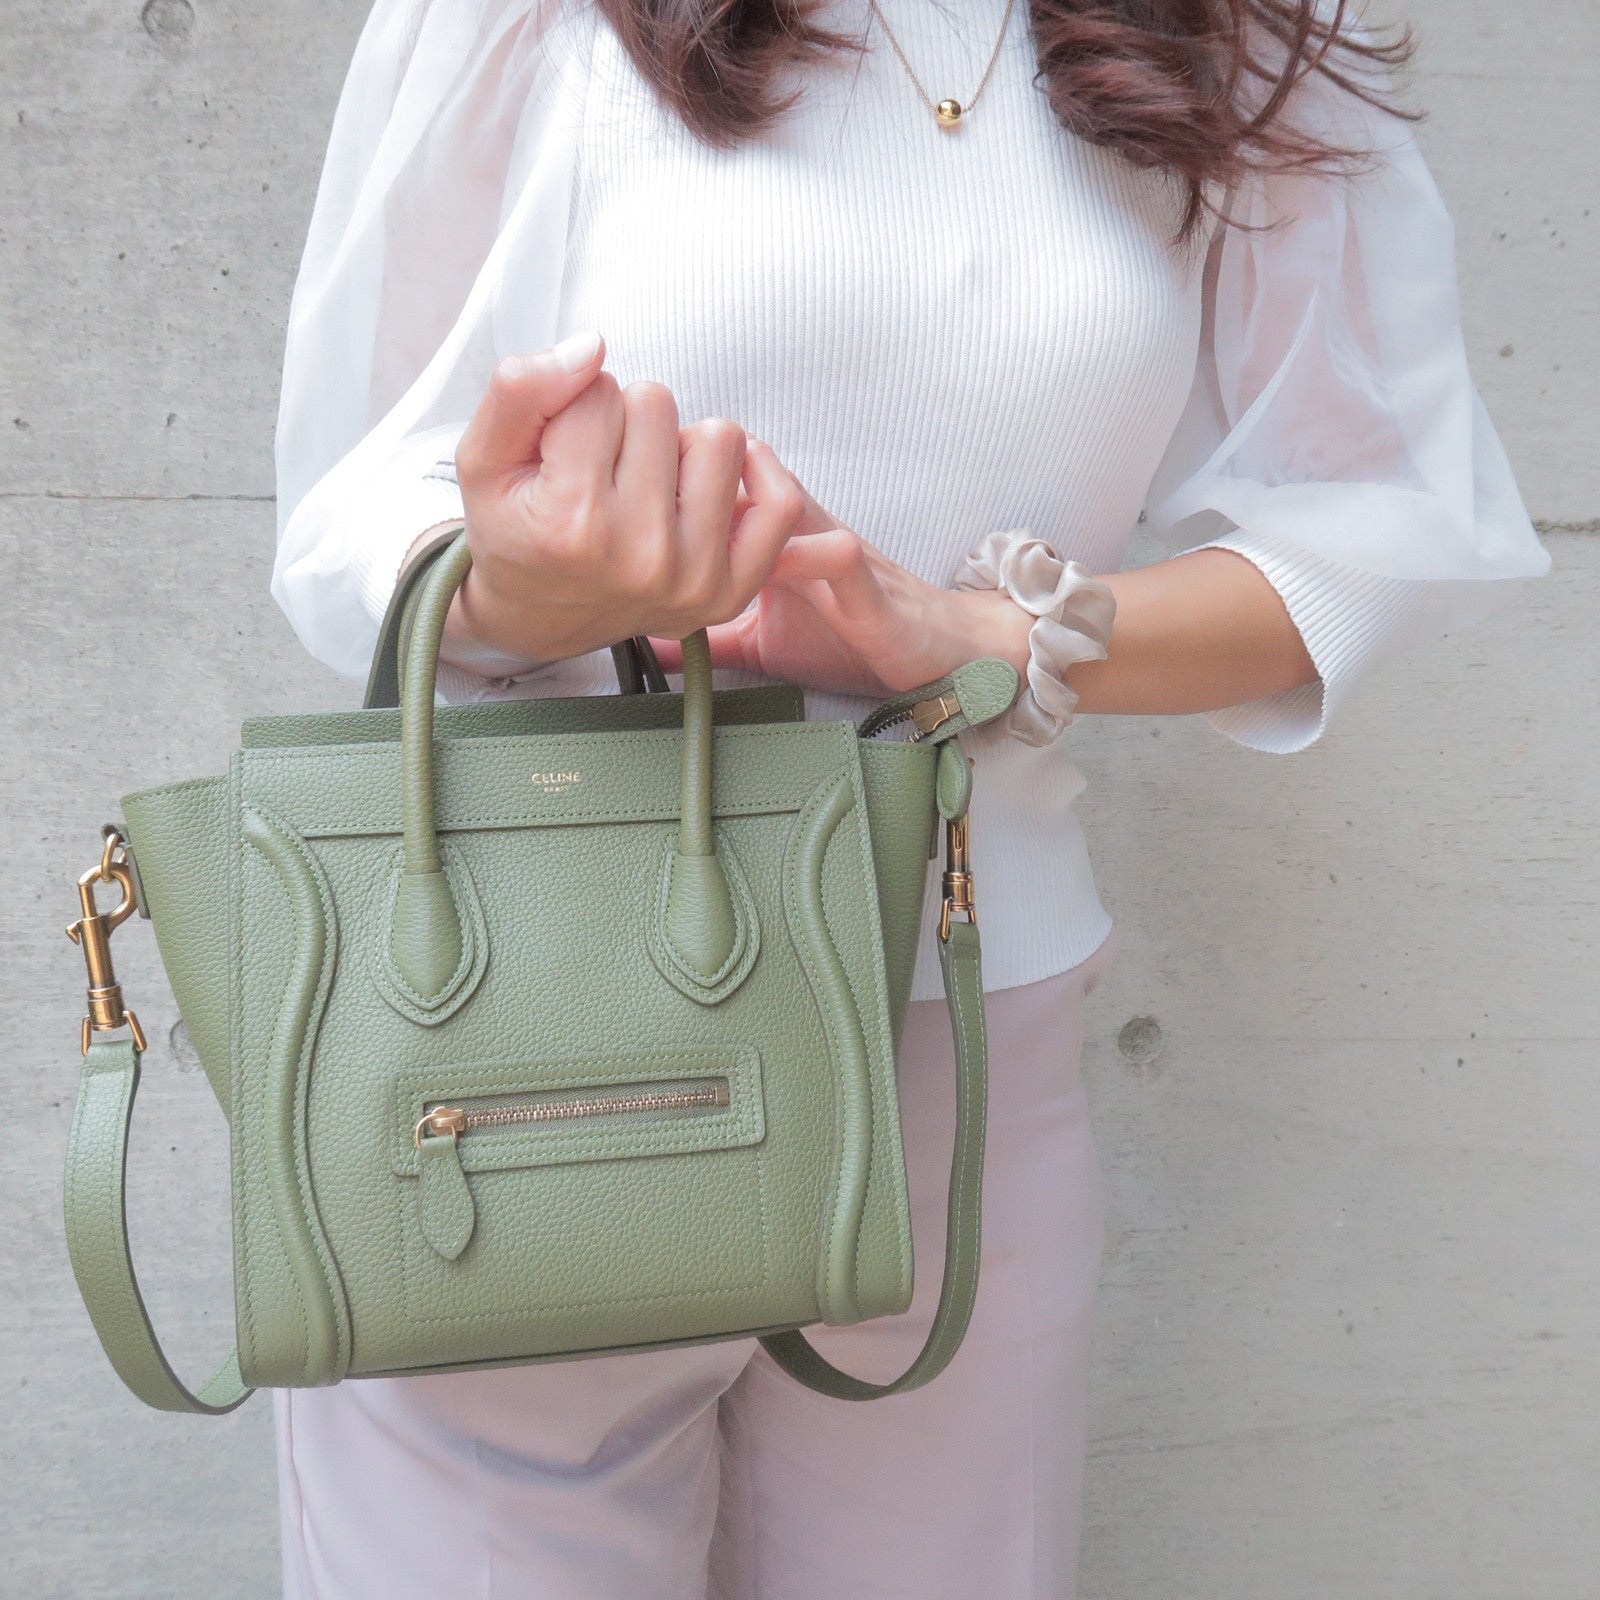 Green - Leather - 189243 – dct - 2Way - Shopper - Bag - Celine Cotton  Blouse Pre Owned Condition Good - Luggage - Nano - CELINE - ep_vintage  luxury Store